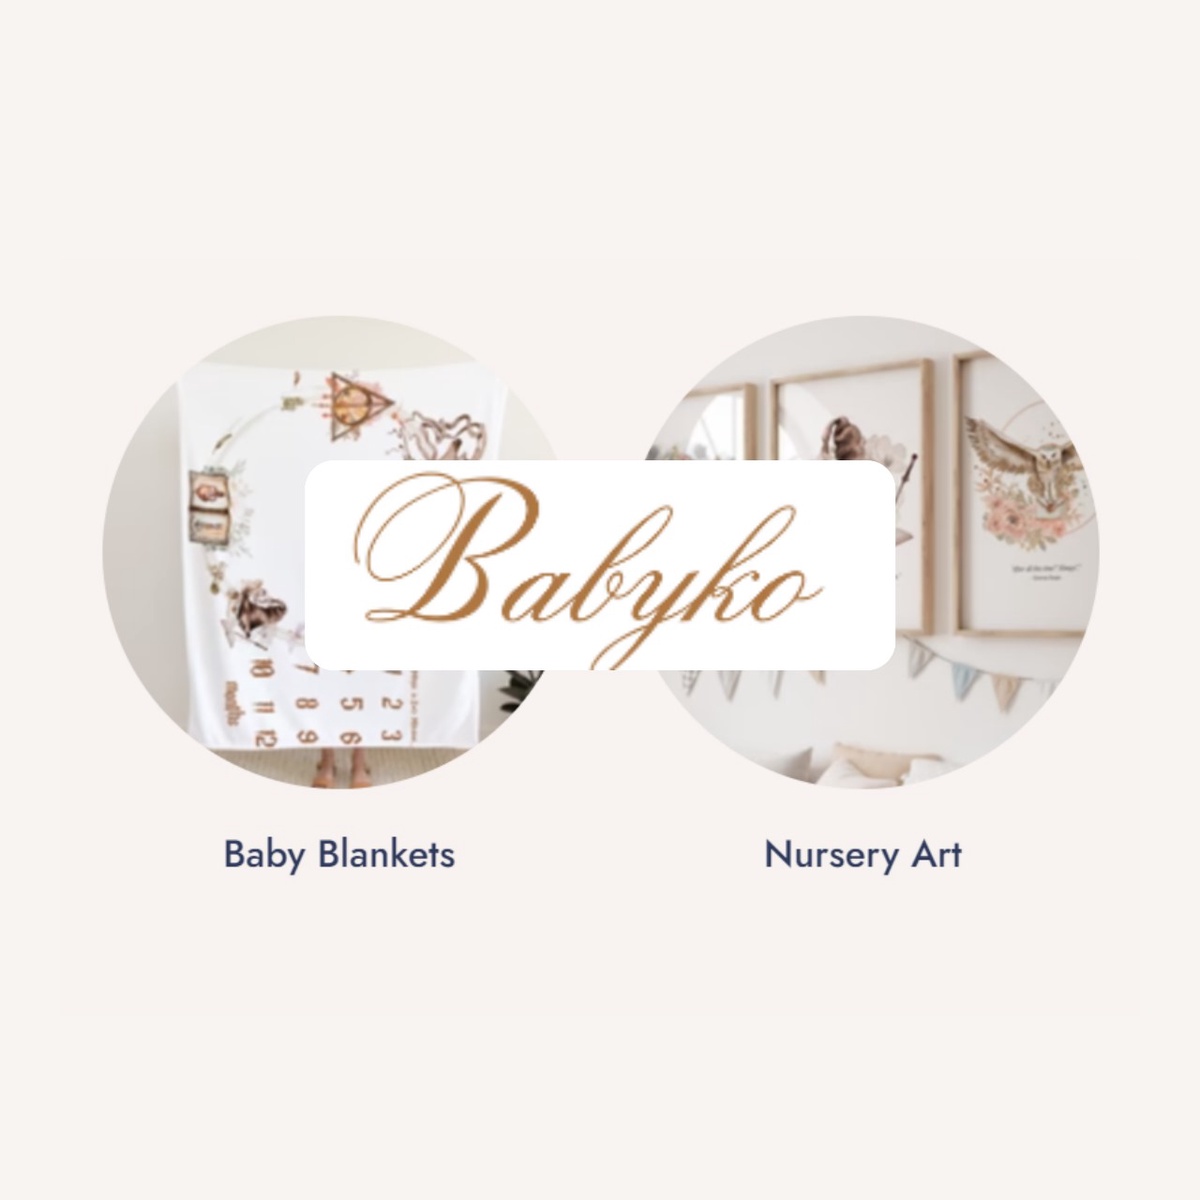 Babyko: Your Ultimate Destination for a Magical Baby Nursery